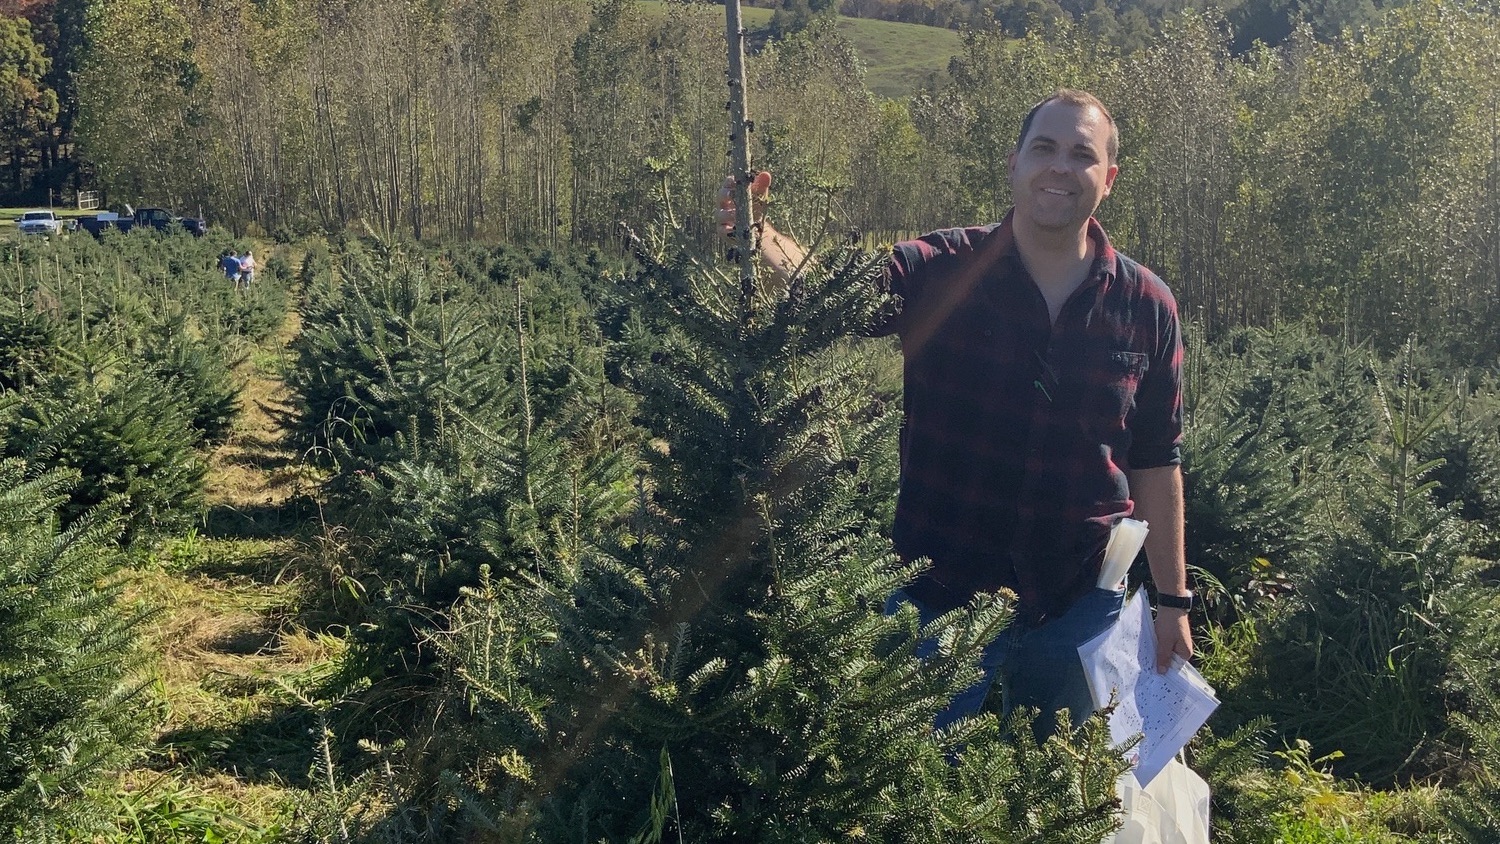 Justin Whitehill stands beside a Christmas tree